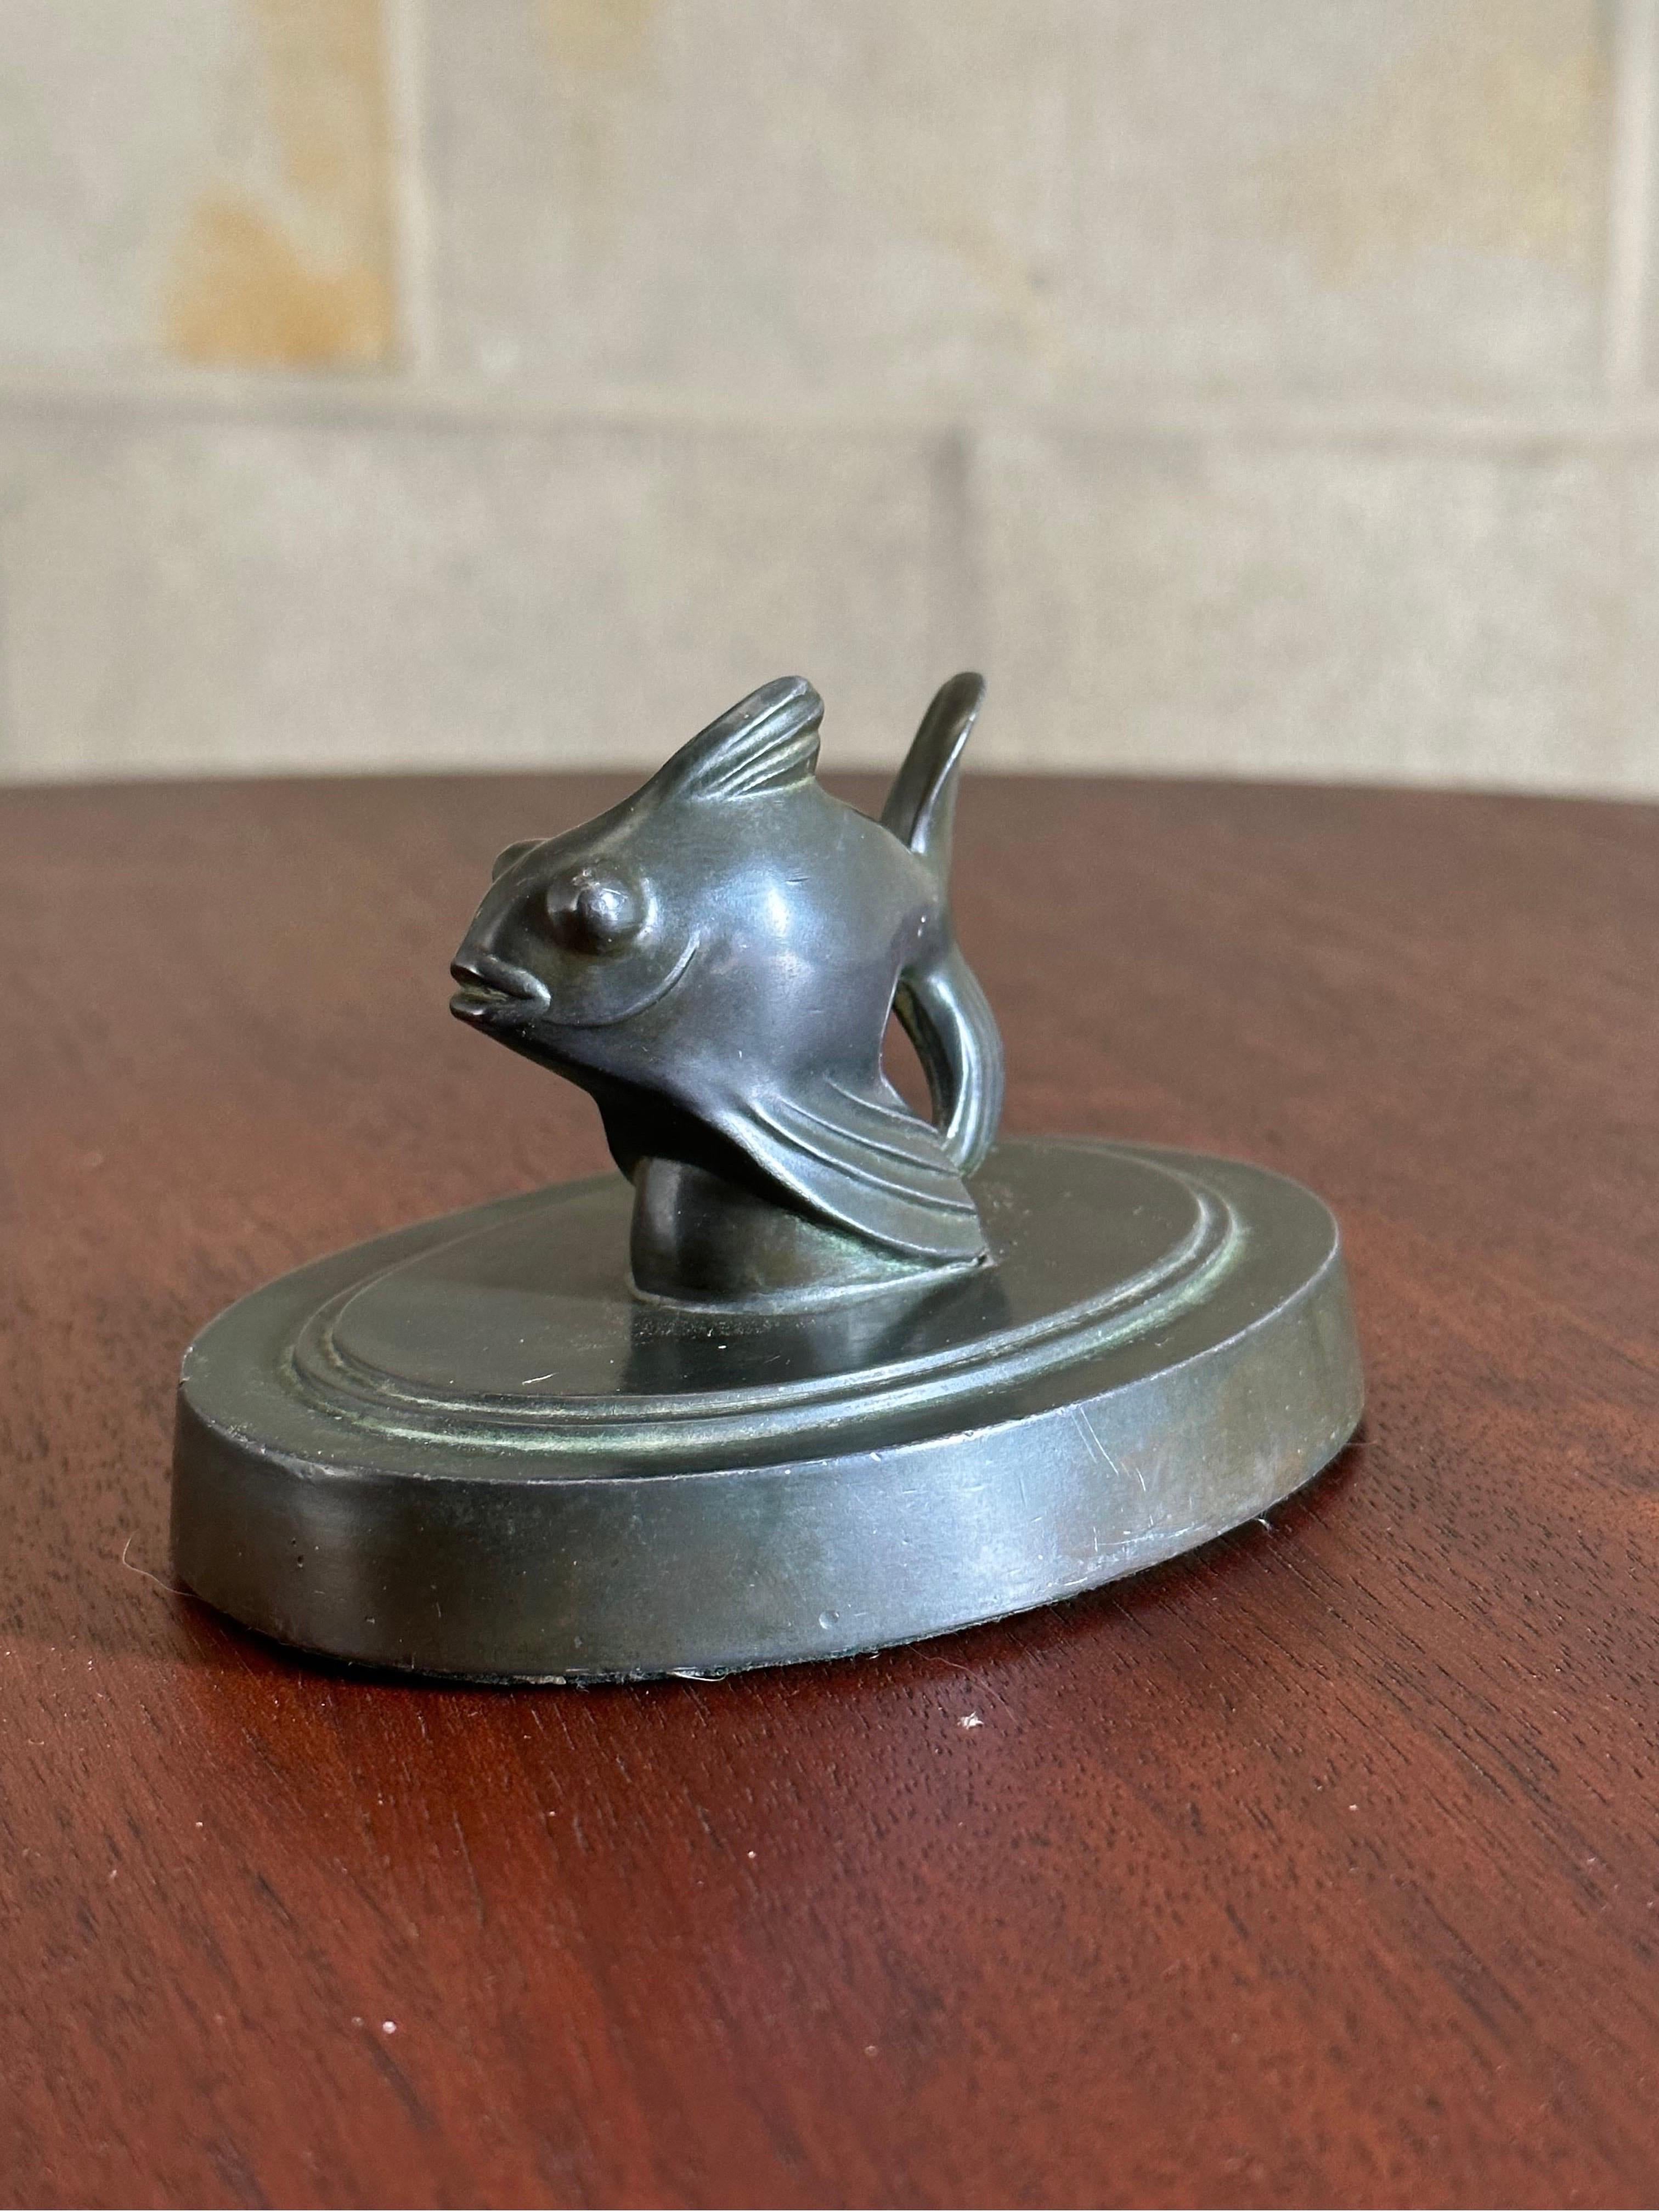 A Heavy metal (likely pewter) paperweight designed by Just Andersen. Paperweight depicts a Fantail Fish. A lovely Art Deco style piece which can work in a variety of different interiors including modern, mid century, contemporary, and traditional.